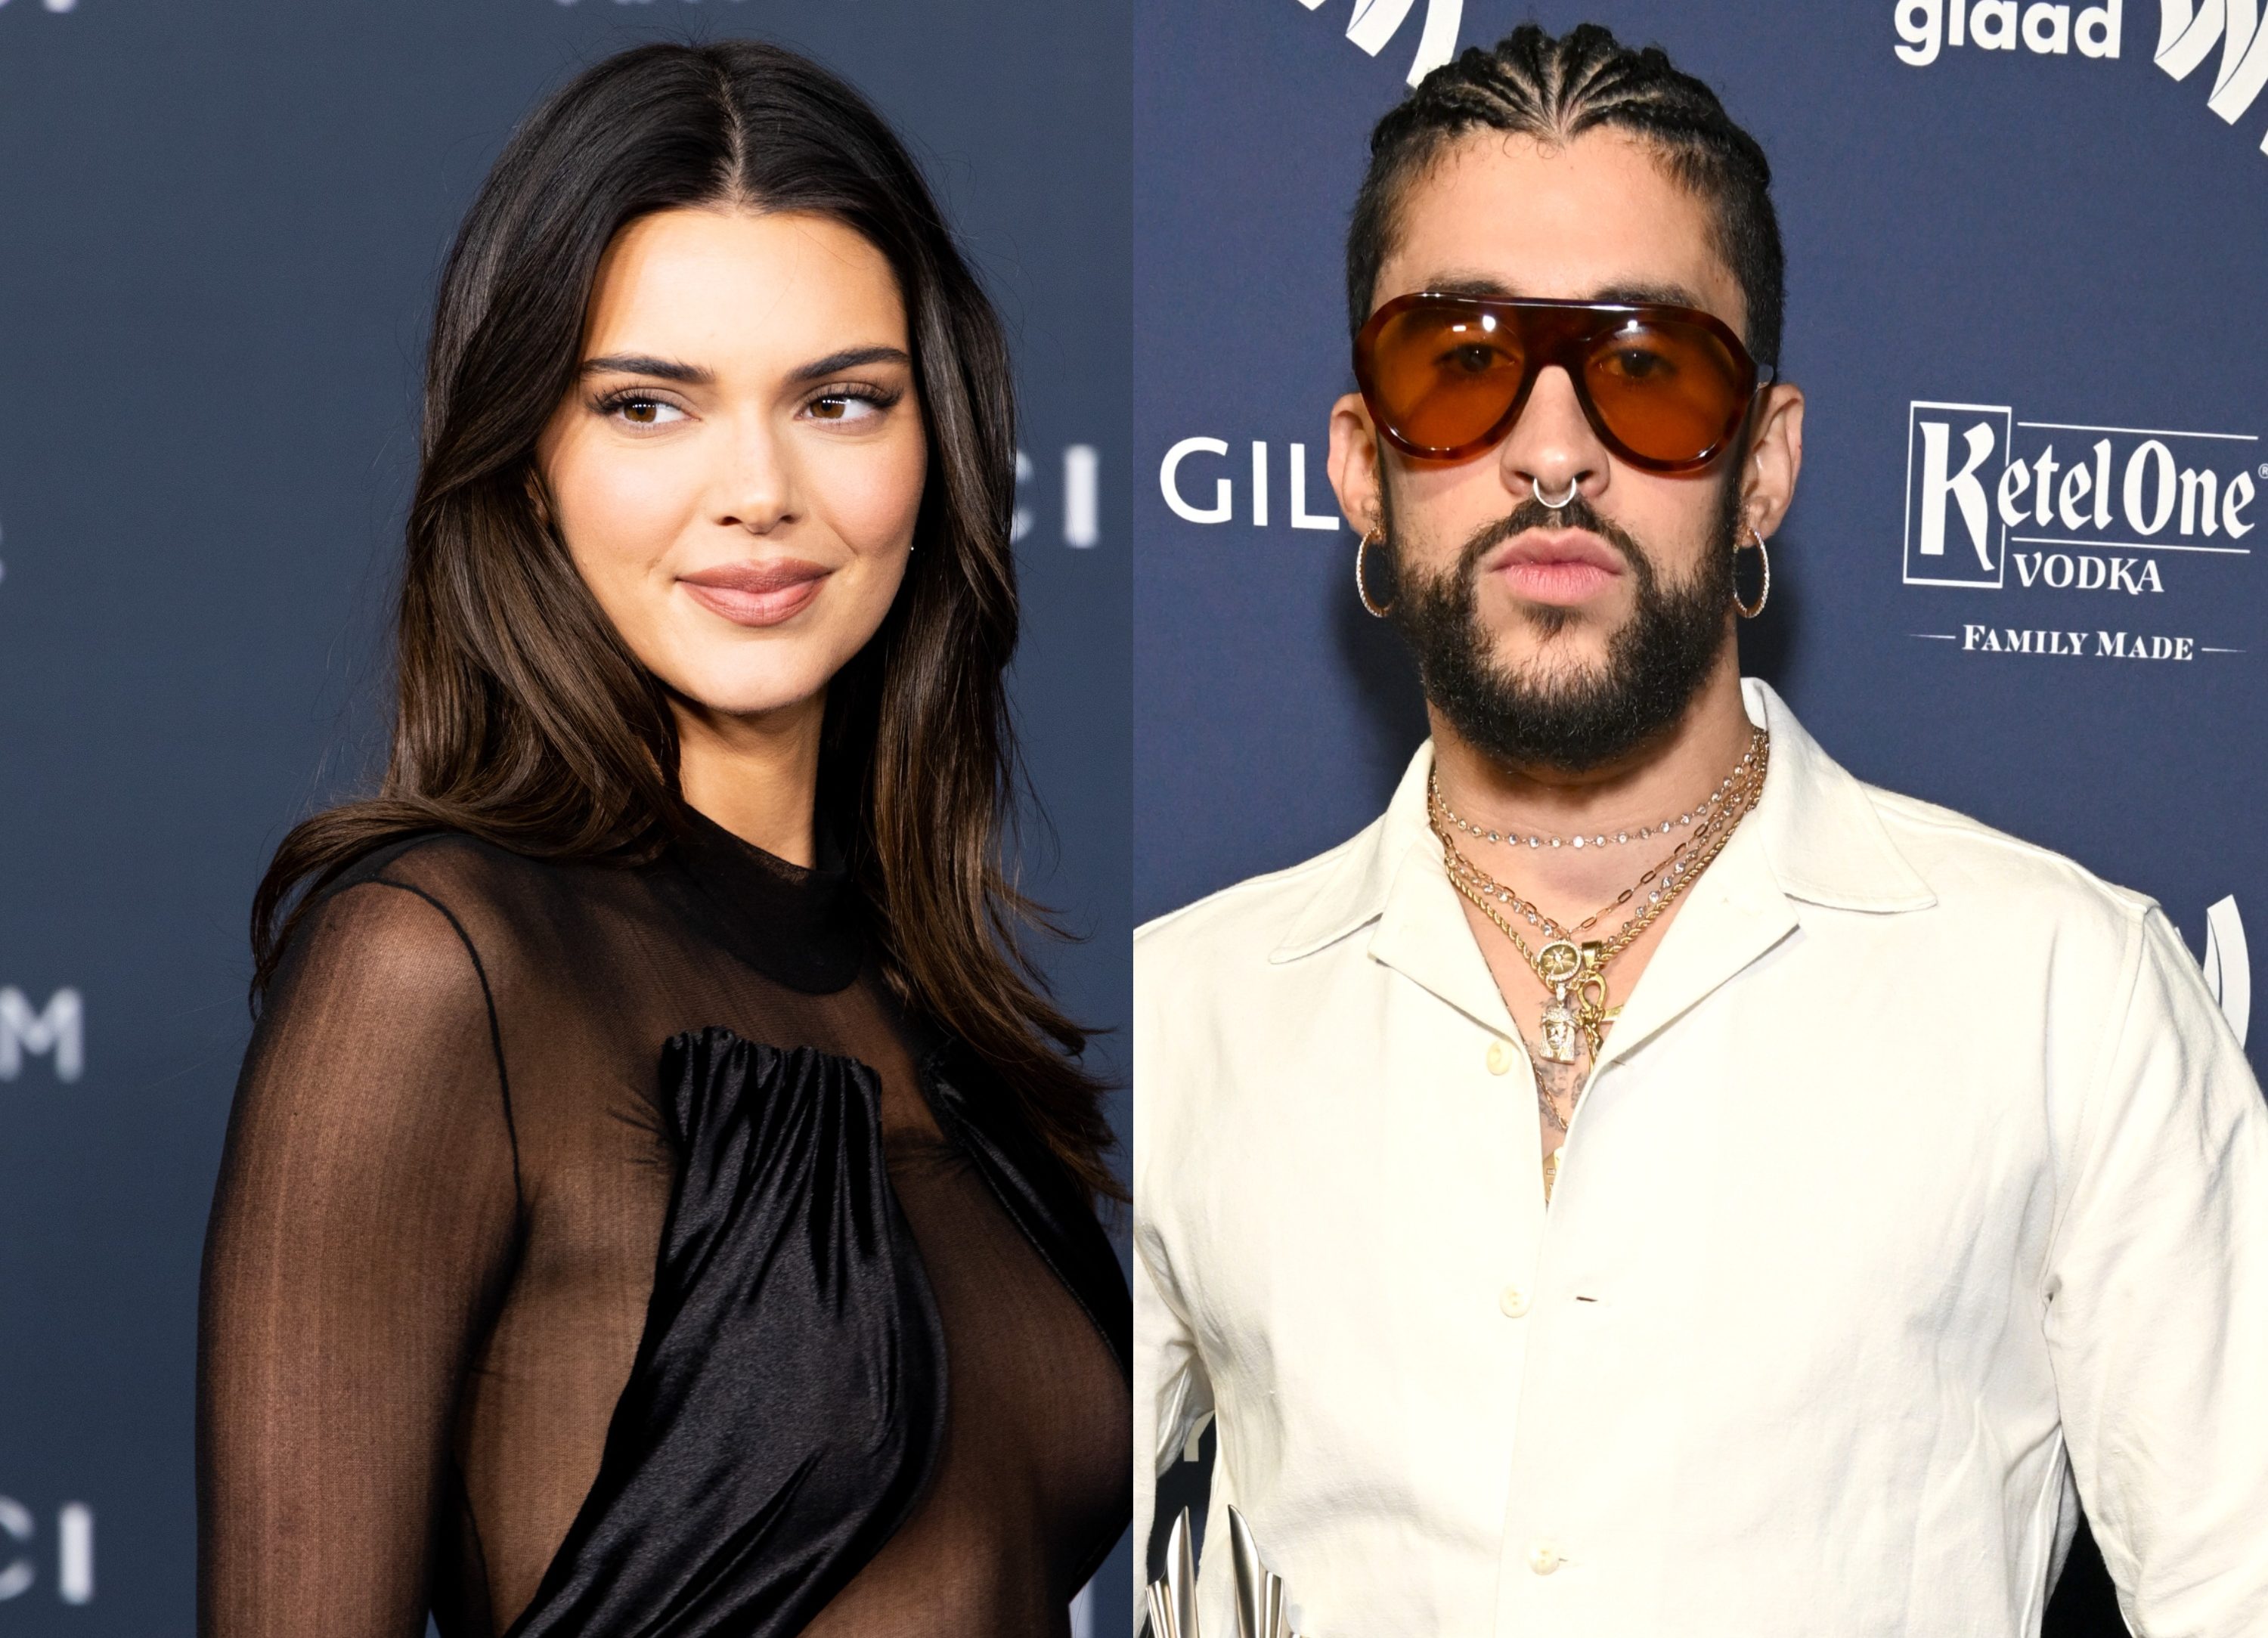 Kendall Jenner & Bad Bunny Have Fashionable Date Night In New York